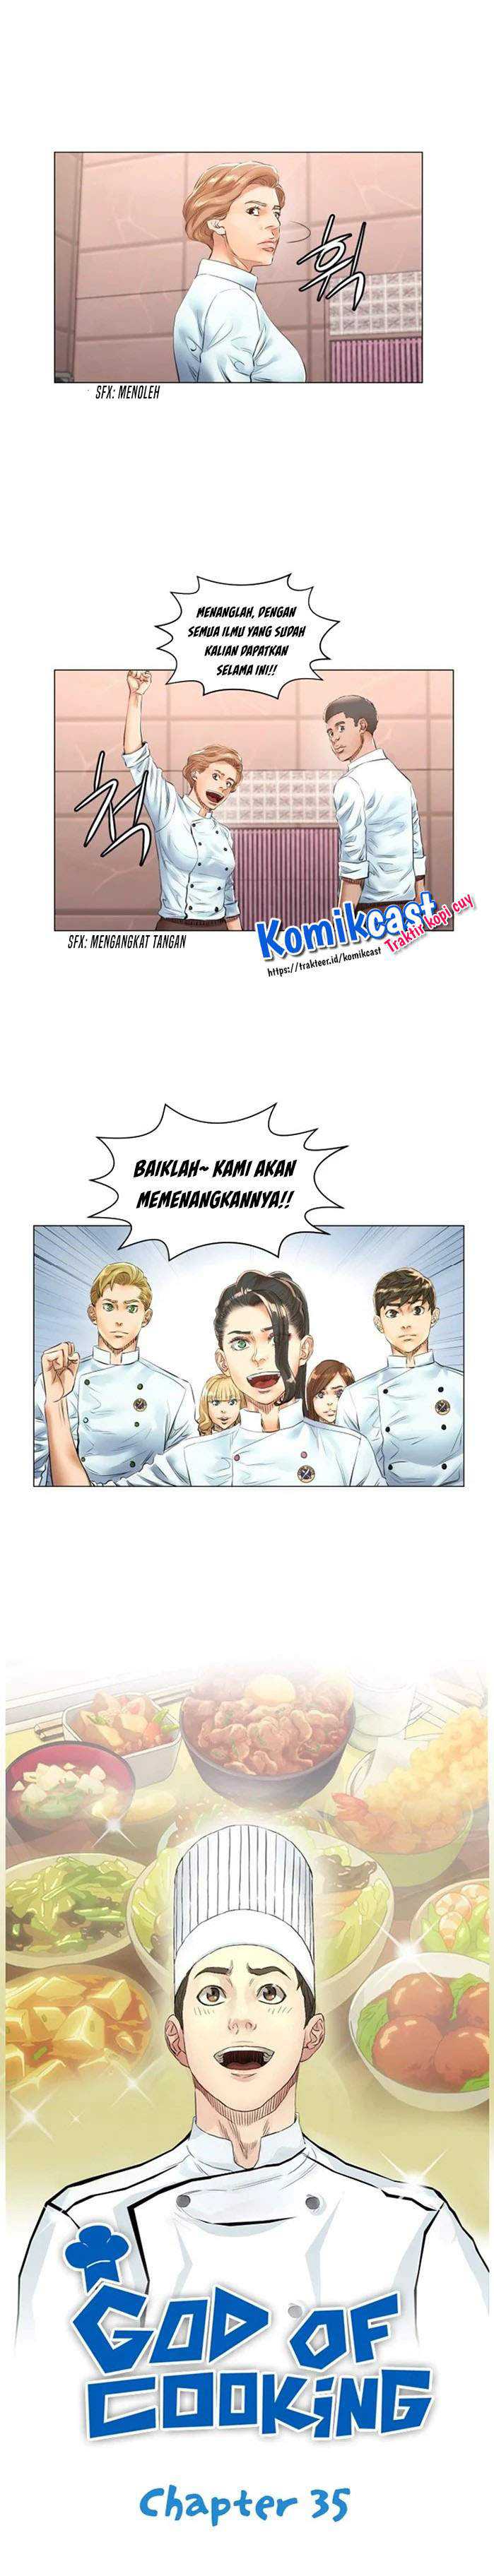 God of Cooking Chapter 35